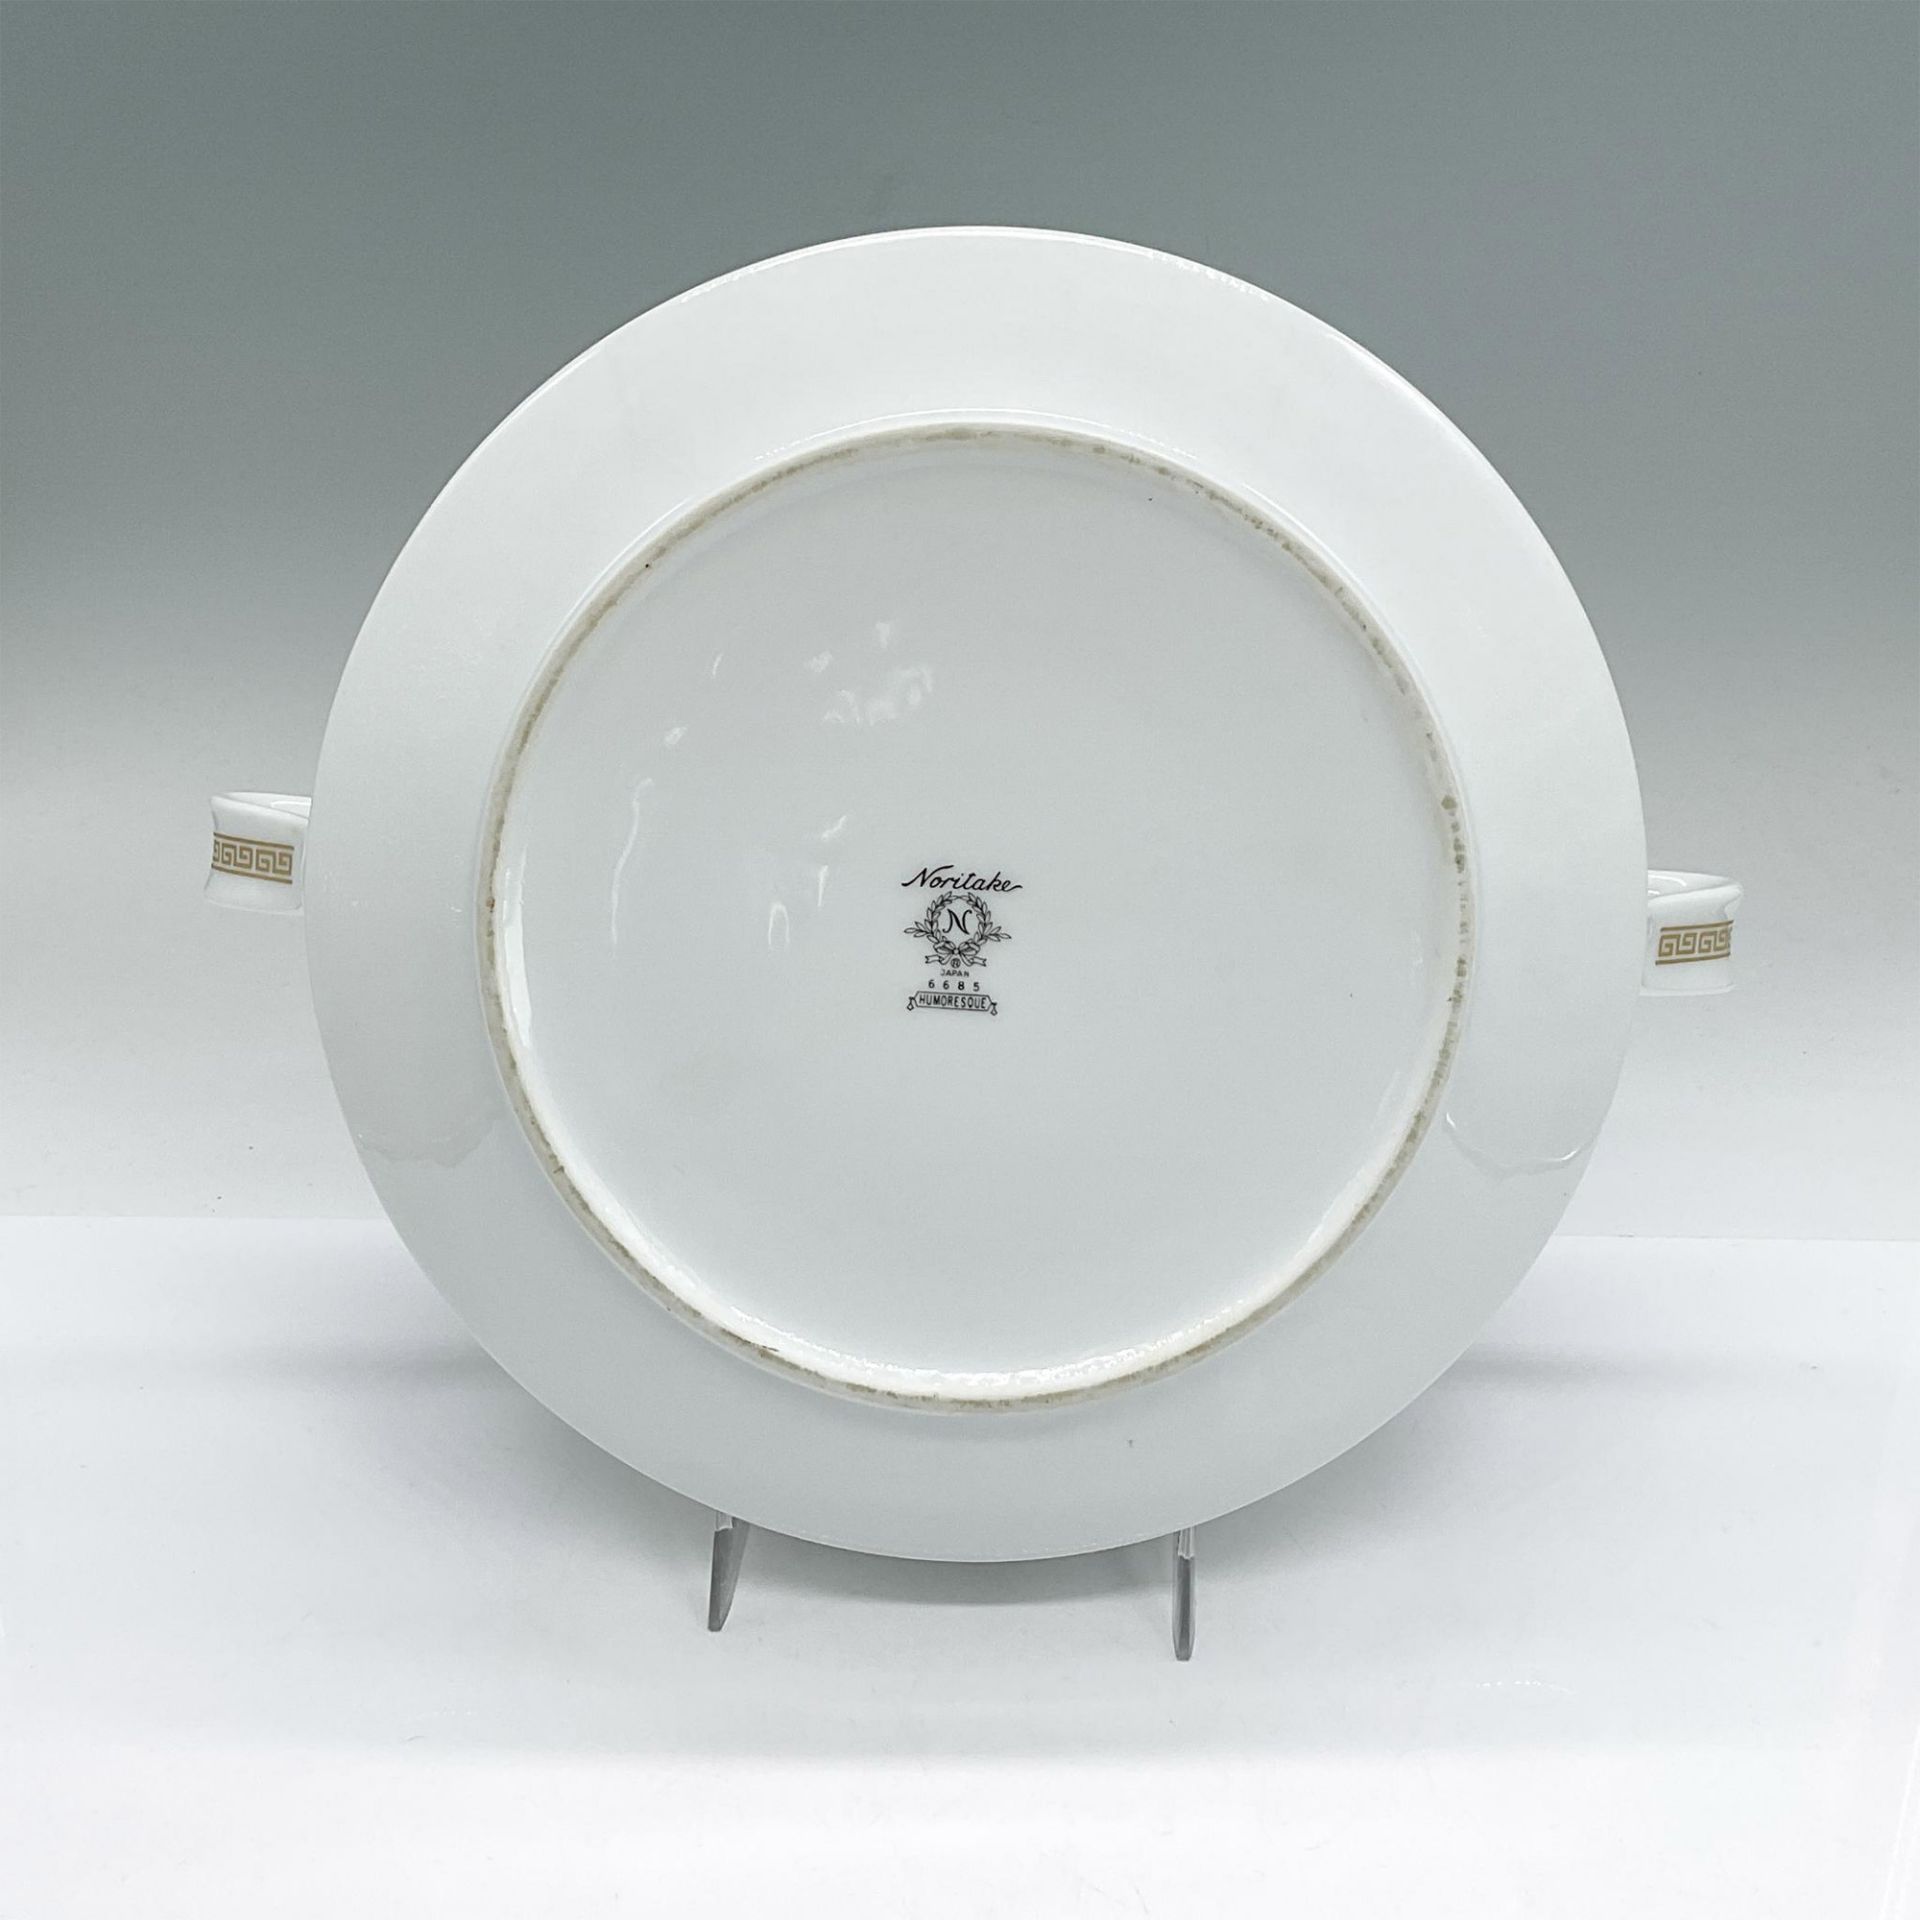 Noritake Porcelain Covered Serving Dish, Humoresque Pattern - Image 3 of 3